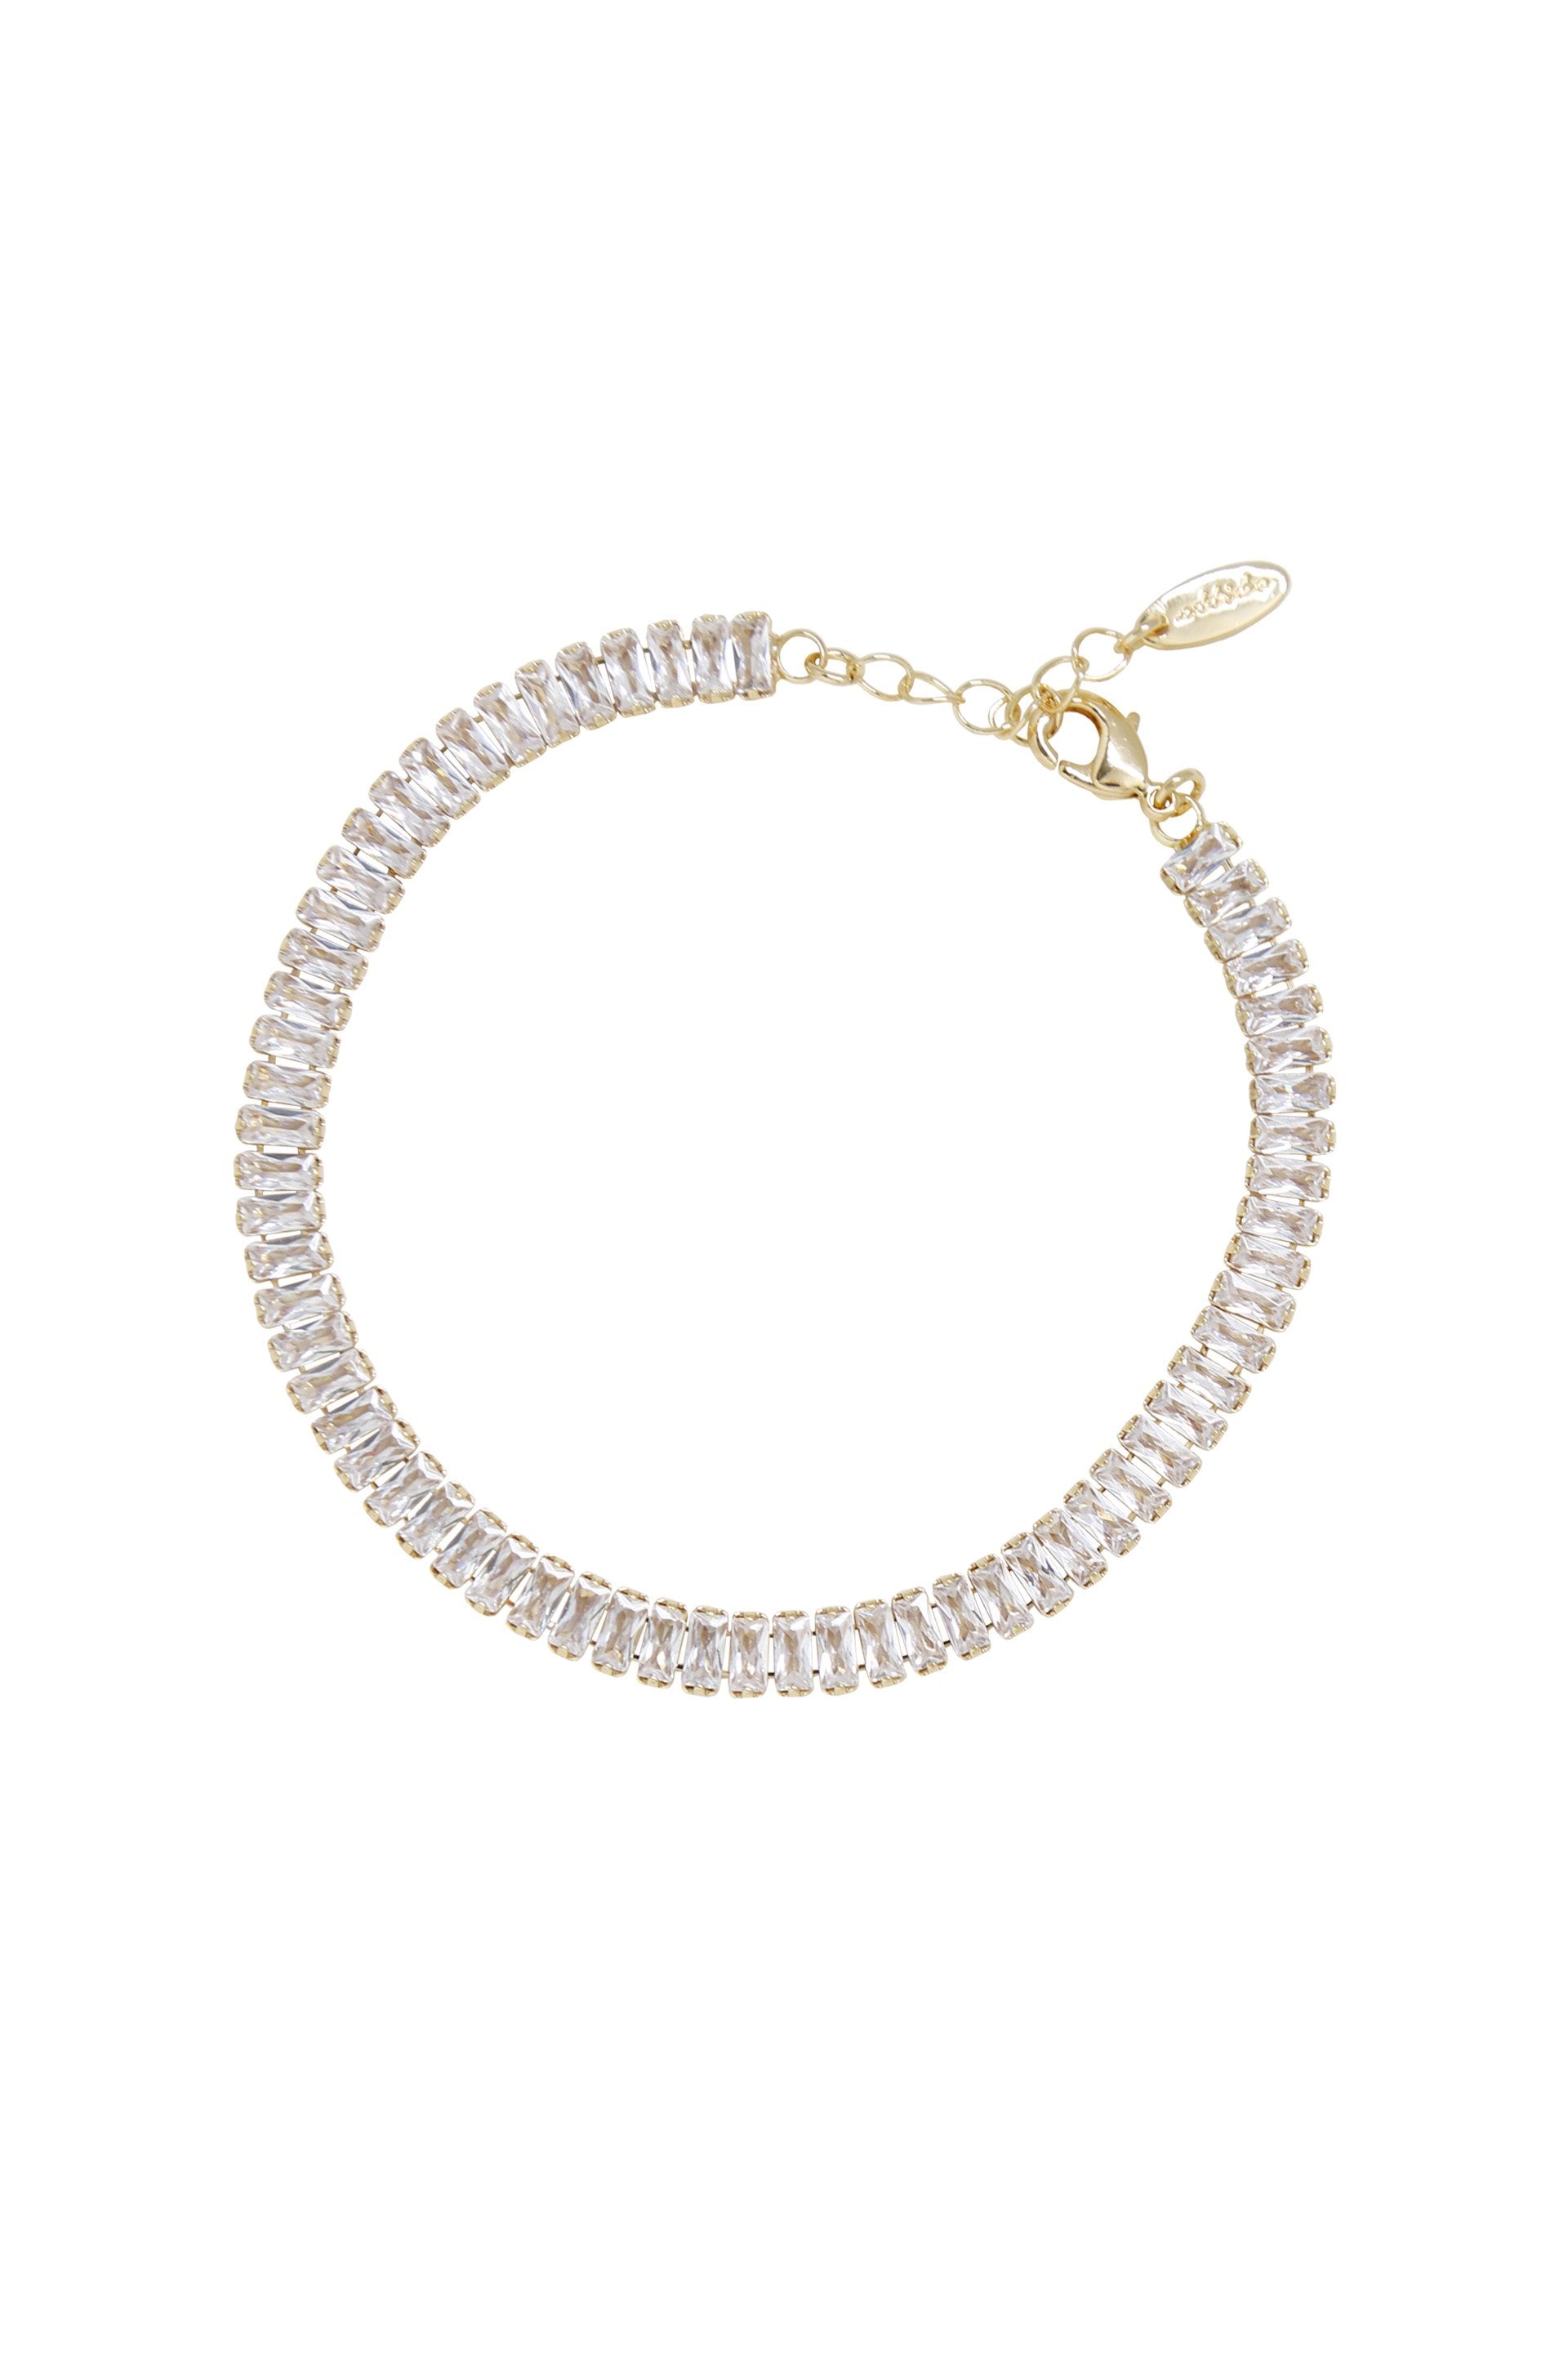 Rhinestone Baguette 18k Gold Plated Anklet on white background